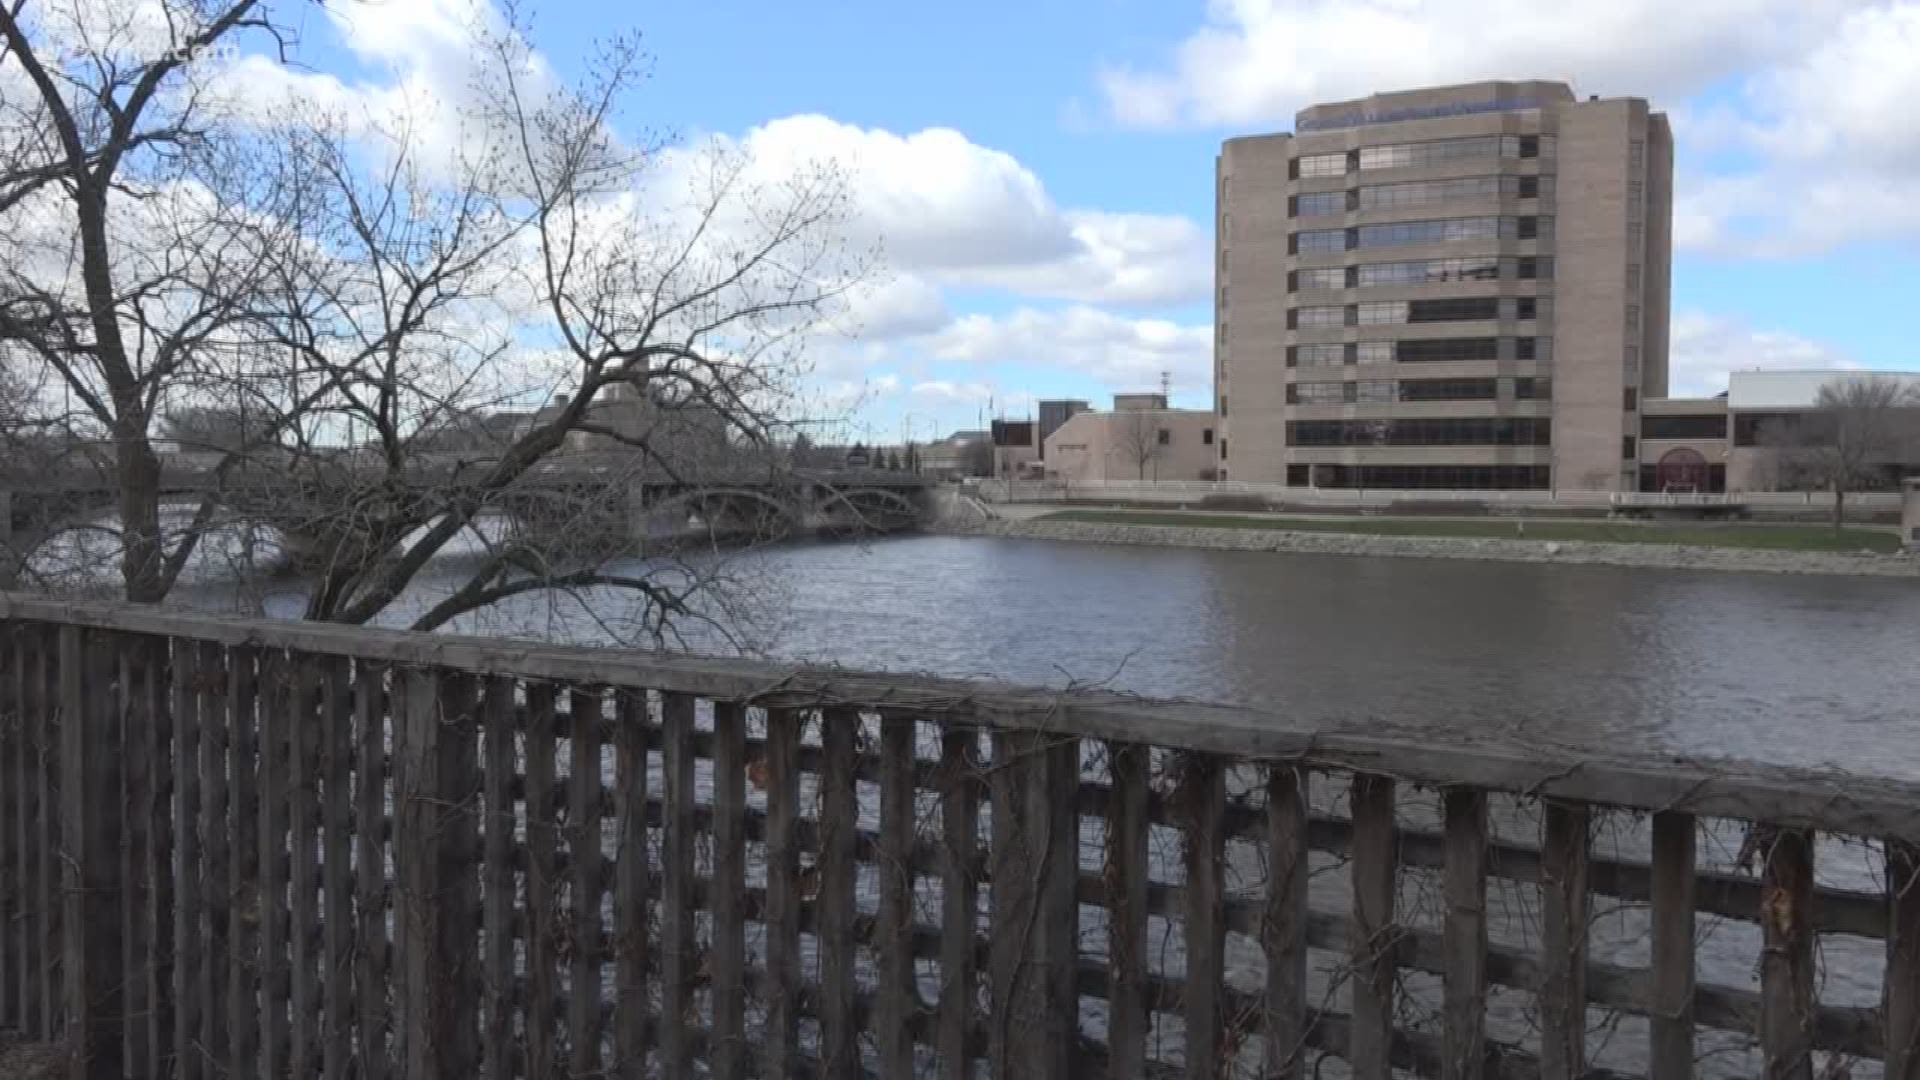 The dredging debate continues today over whether the Grand River Waterway Project should move forward. The Grand Rapids Steelheaders have invited an Michigan State sea grant educator to talk about environmental risks related to the dredging project.